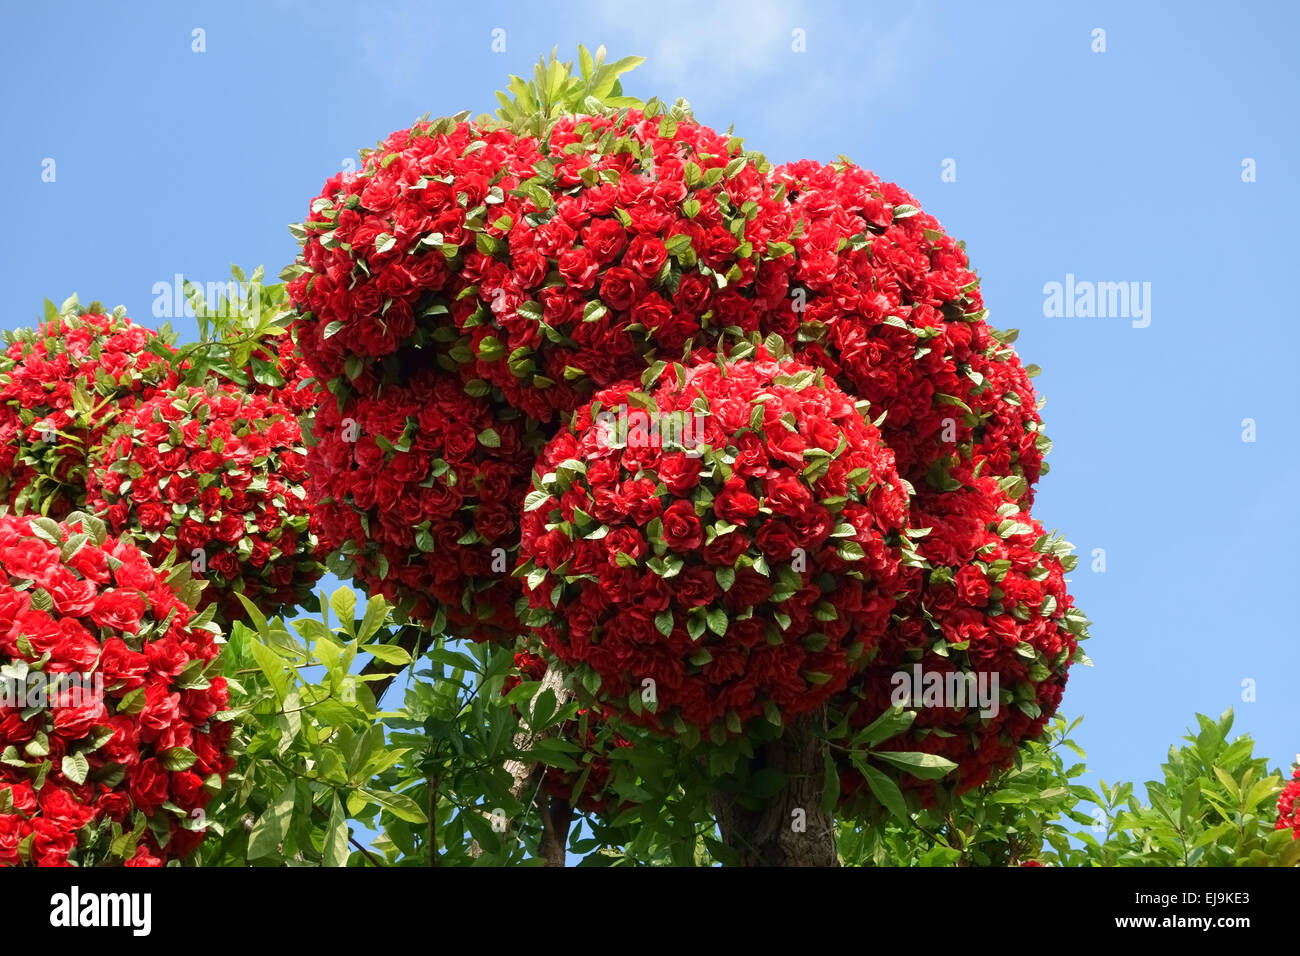 False red paper flowers decorating a real tree, Nonthaburi, Thailand, February Stock Photo